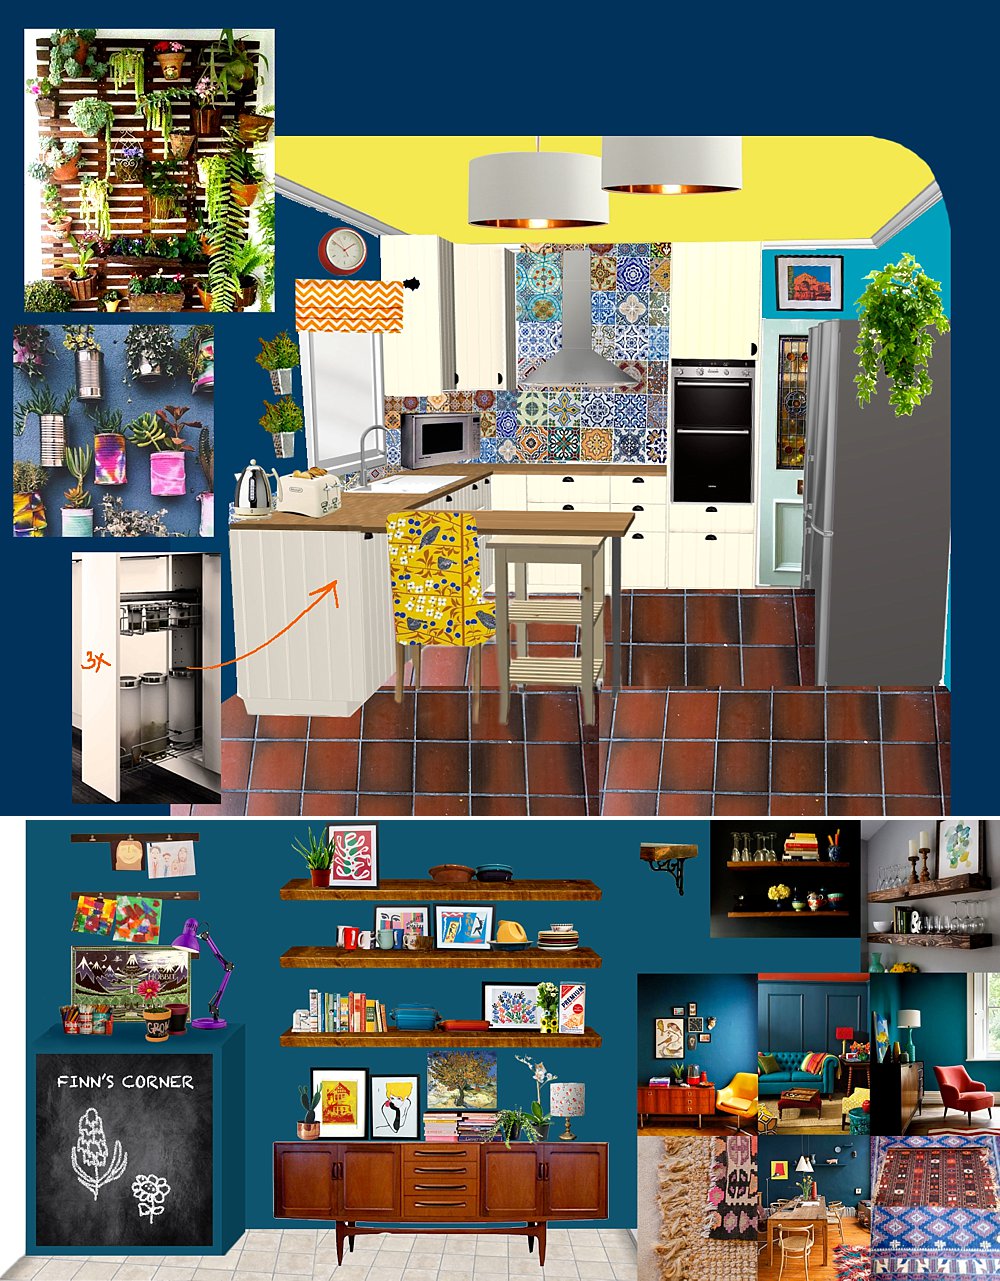 moodboard-warm-cosy-blue-yellow-mexican-tiles-retro-vintage-kitchen-lily-sawyer-interiors_0008